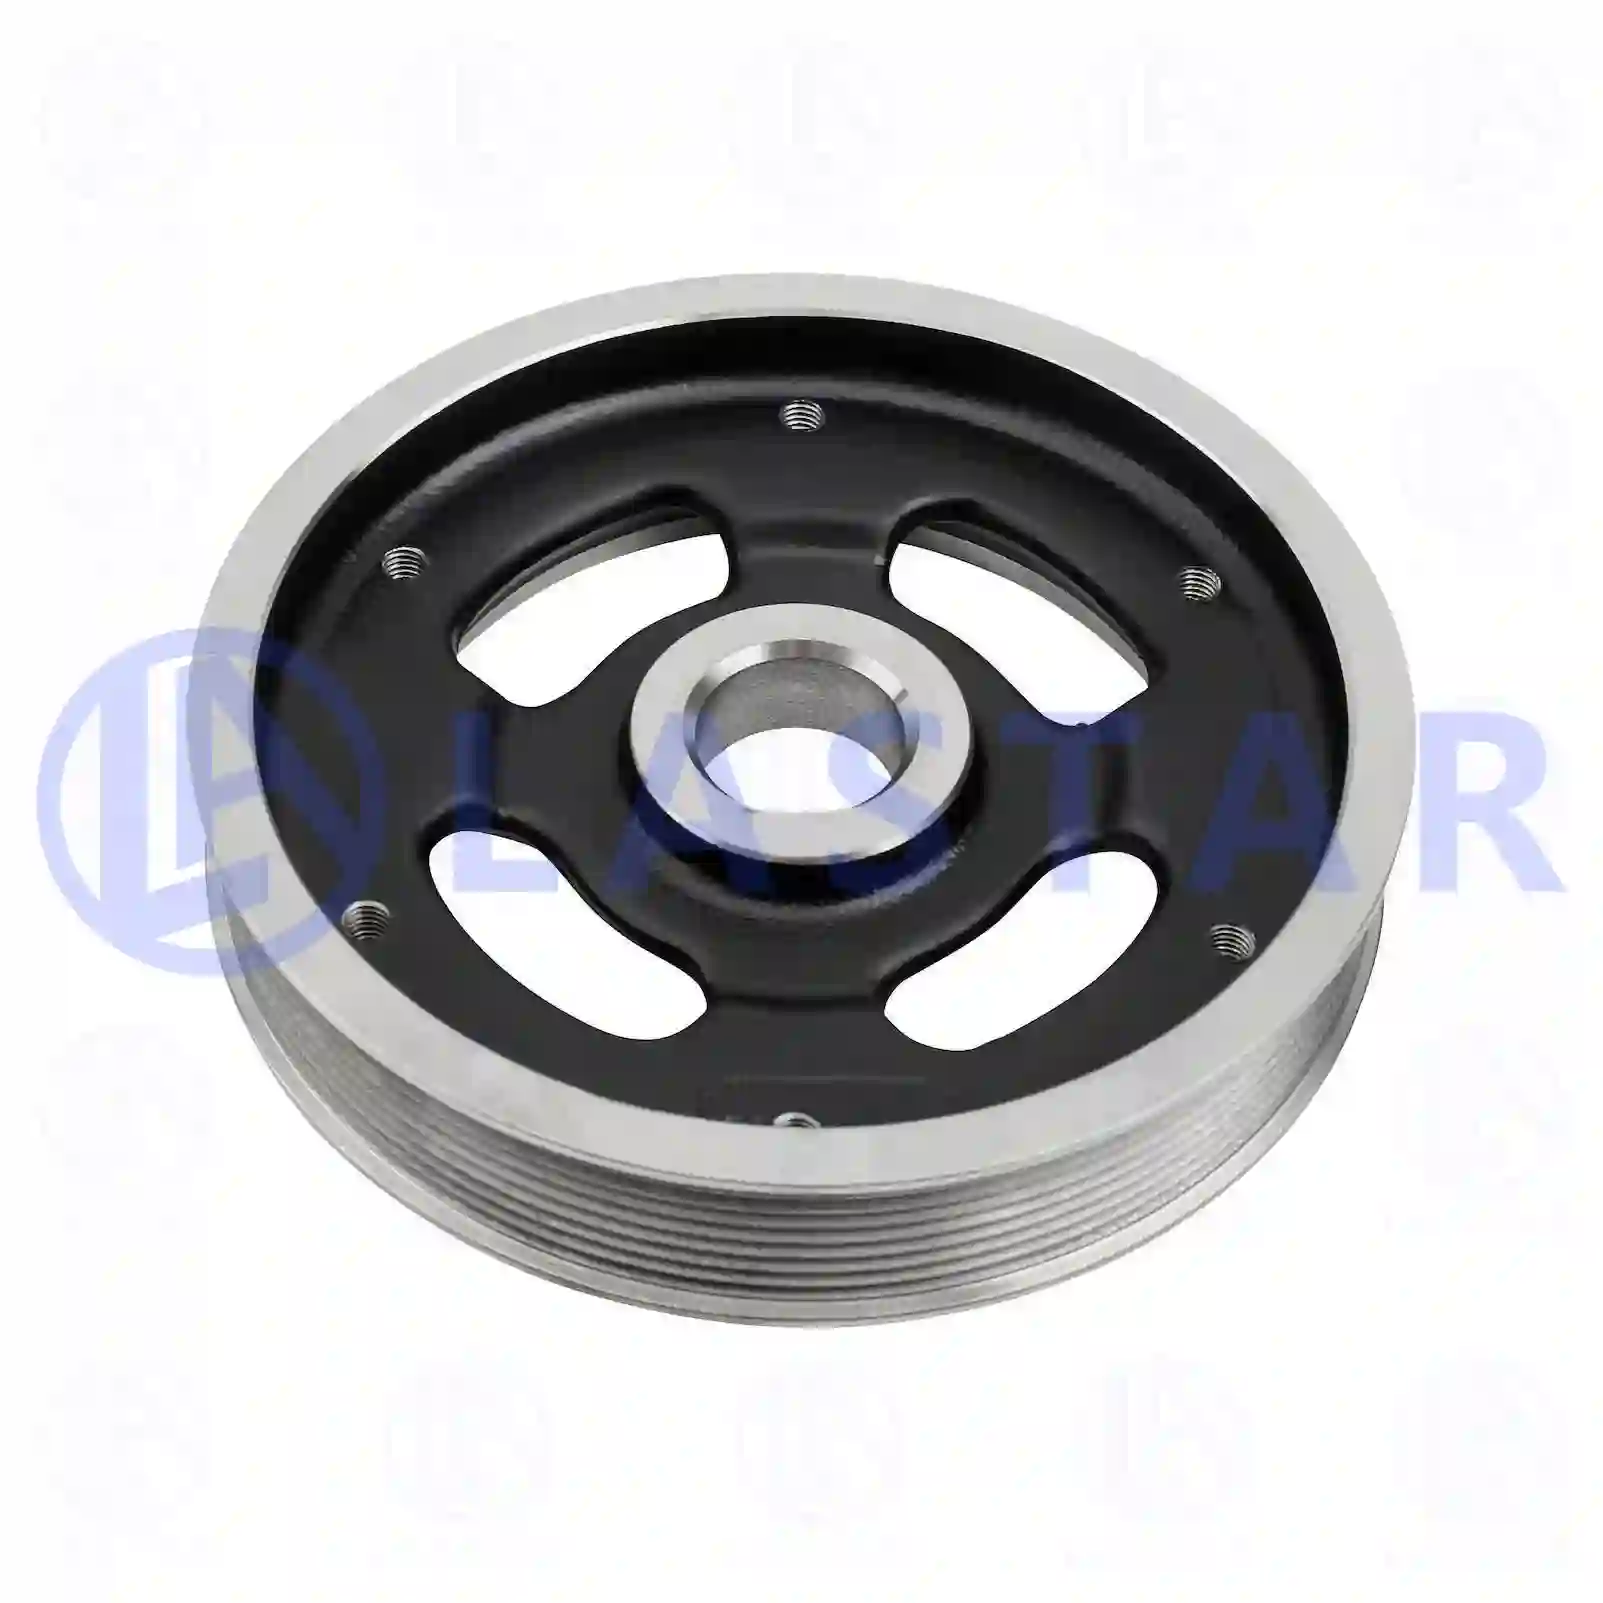 Pulley, fan, 77707827, 4572020210 ||  77707827 Lastar Spare Part | Truck Spare Parts, Auotomotive Spare Parts Pulley, fan, 77707827, 4572020210 ||  77707827 Lastar Spare Part | Truck Spare Parts, Auotomotive Spare Parts